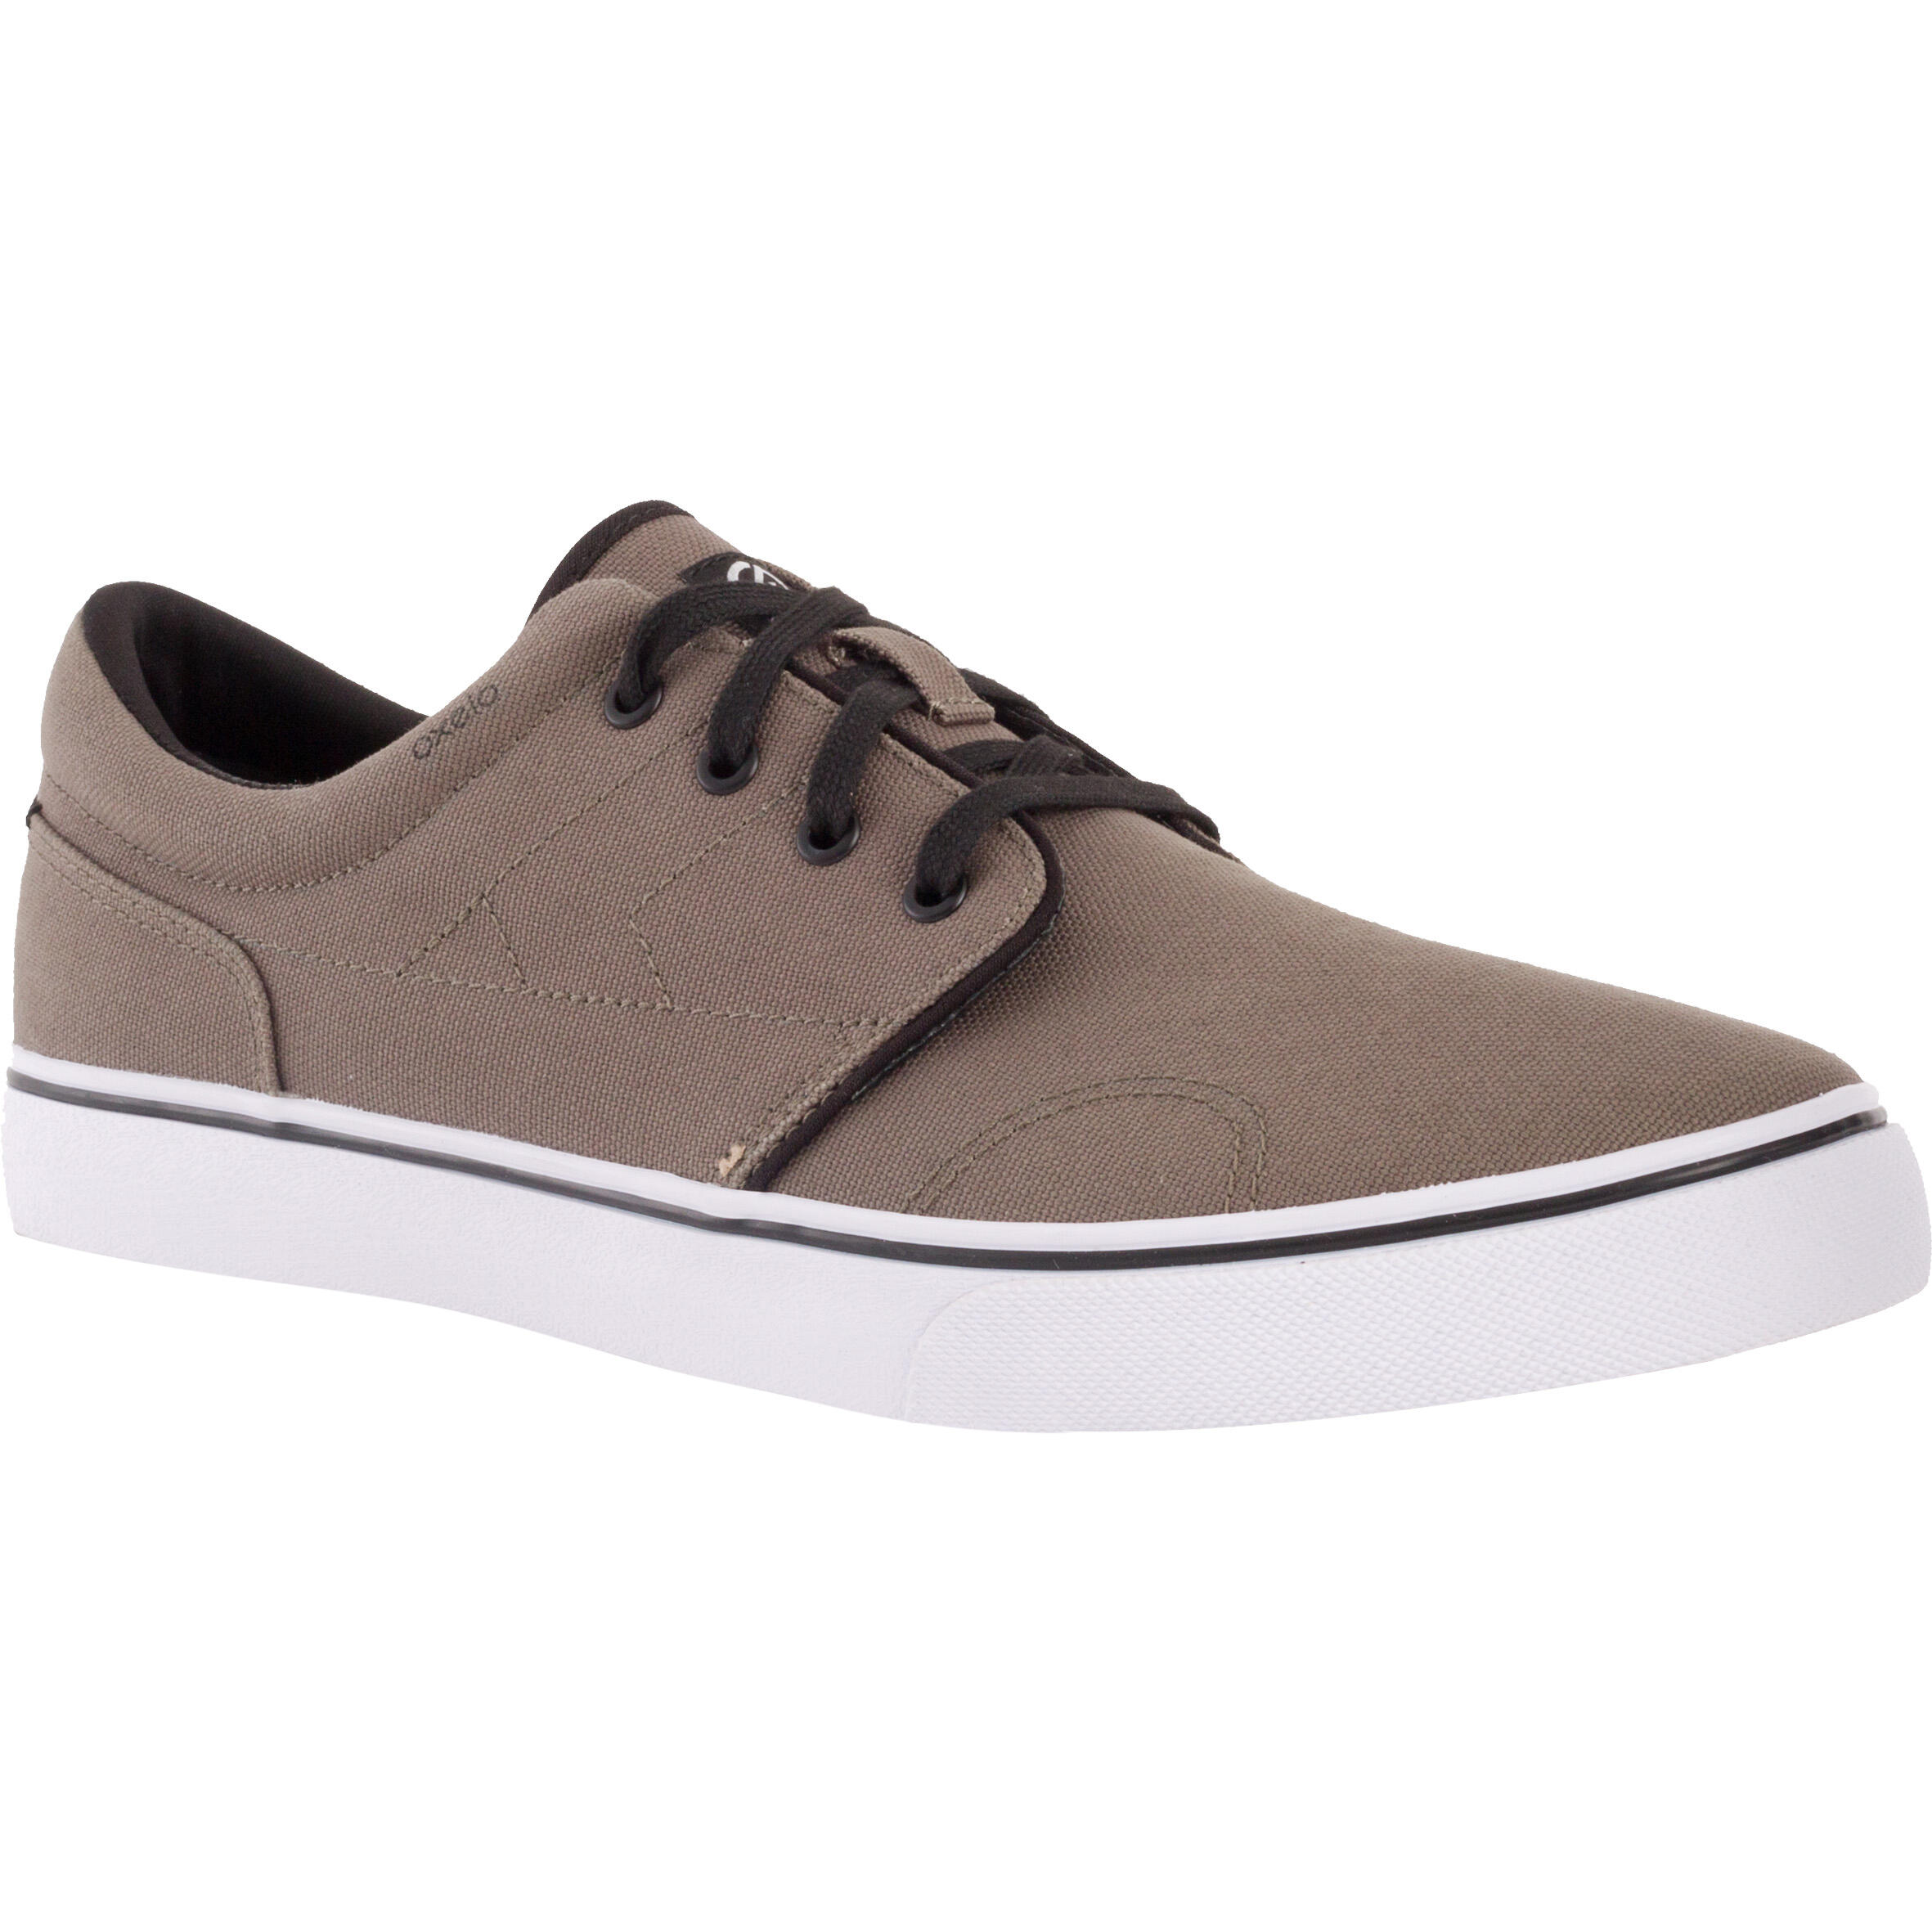 oxelo canvas shoes